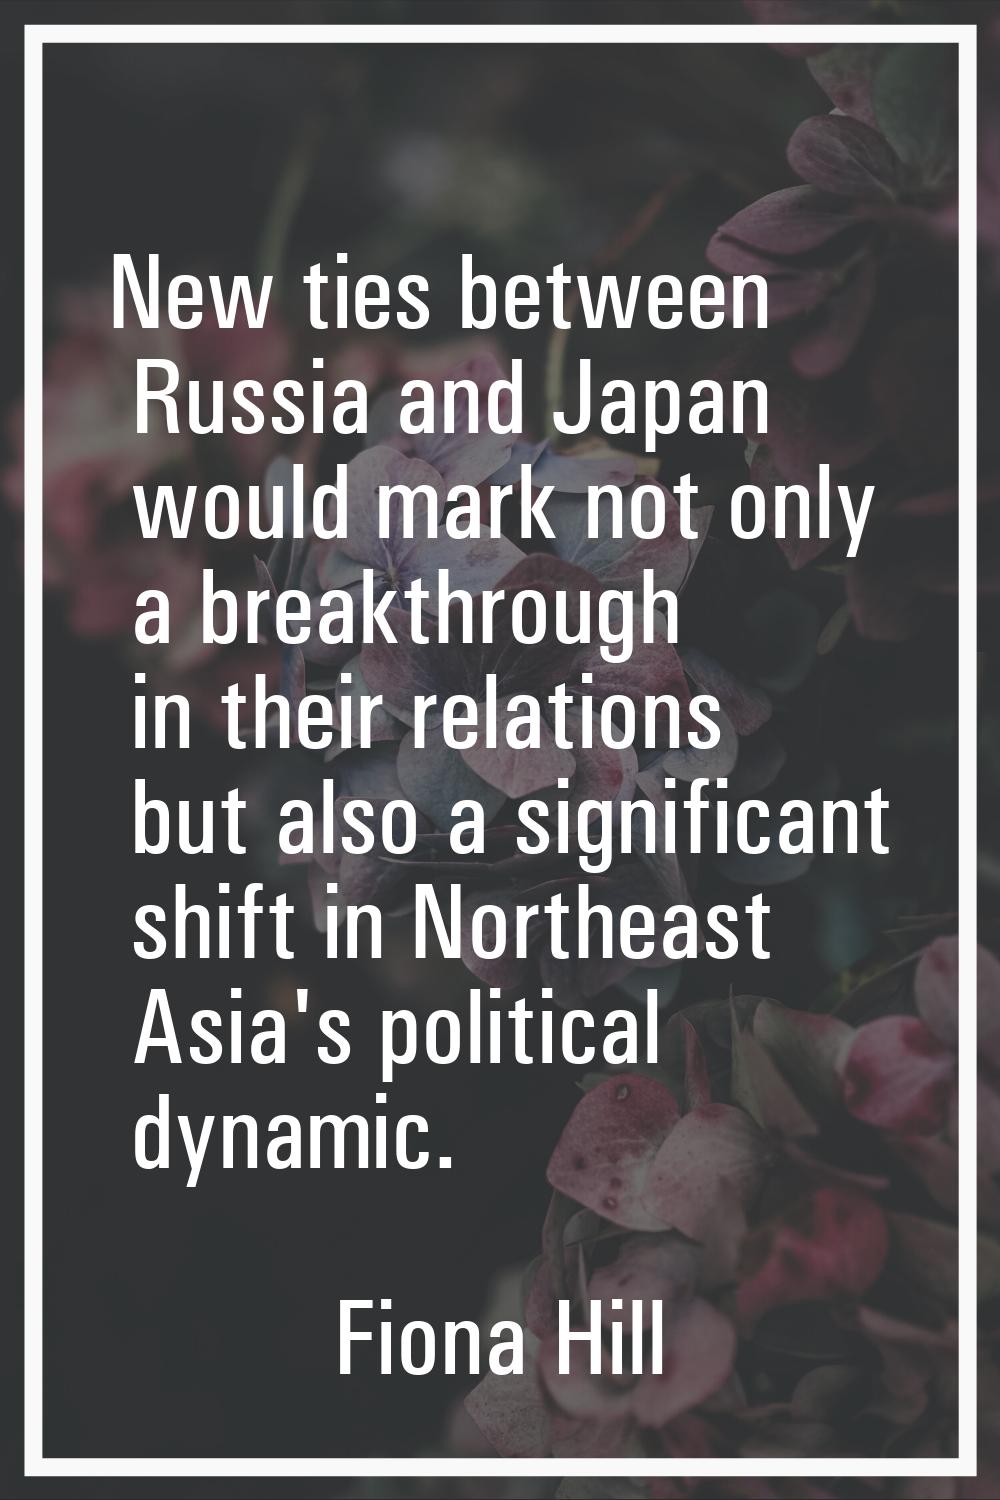 New ties between Russia and Japan would mark not only a breakthrough in their relations but also a 